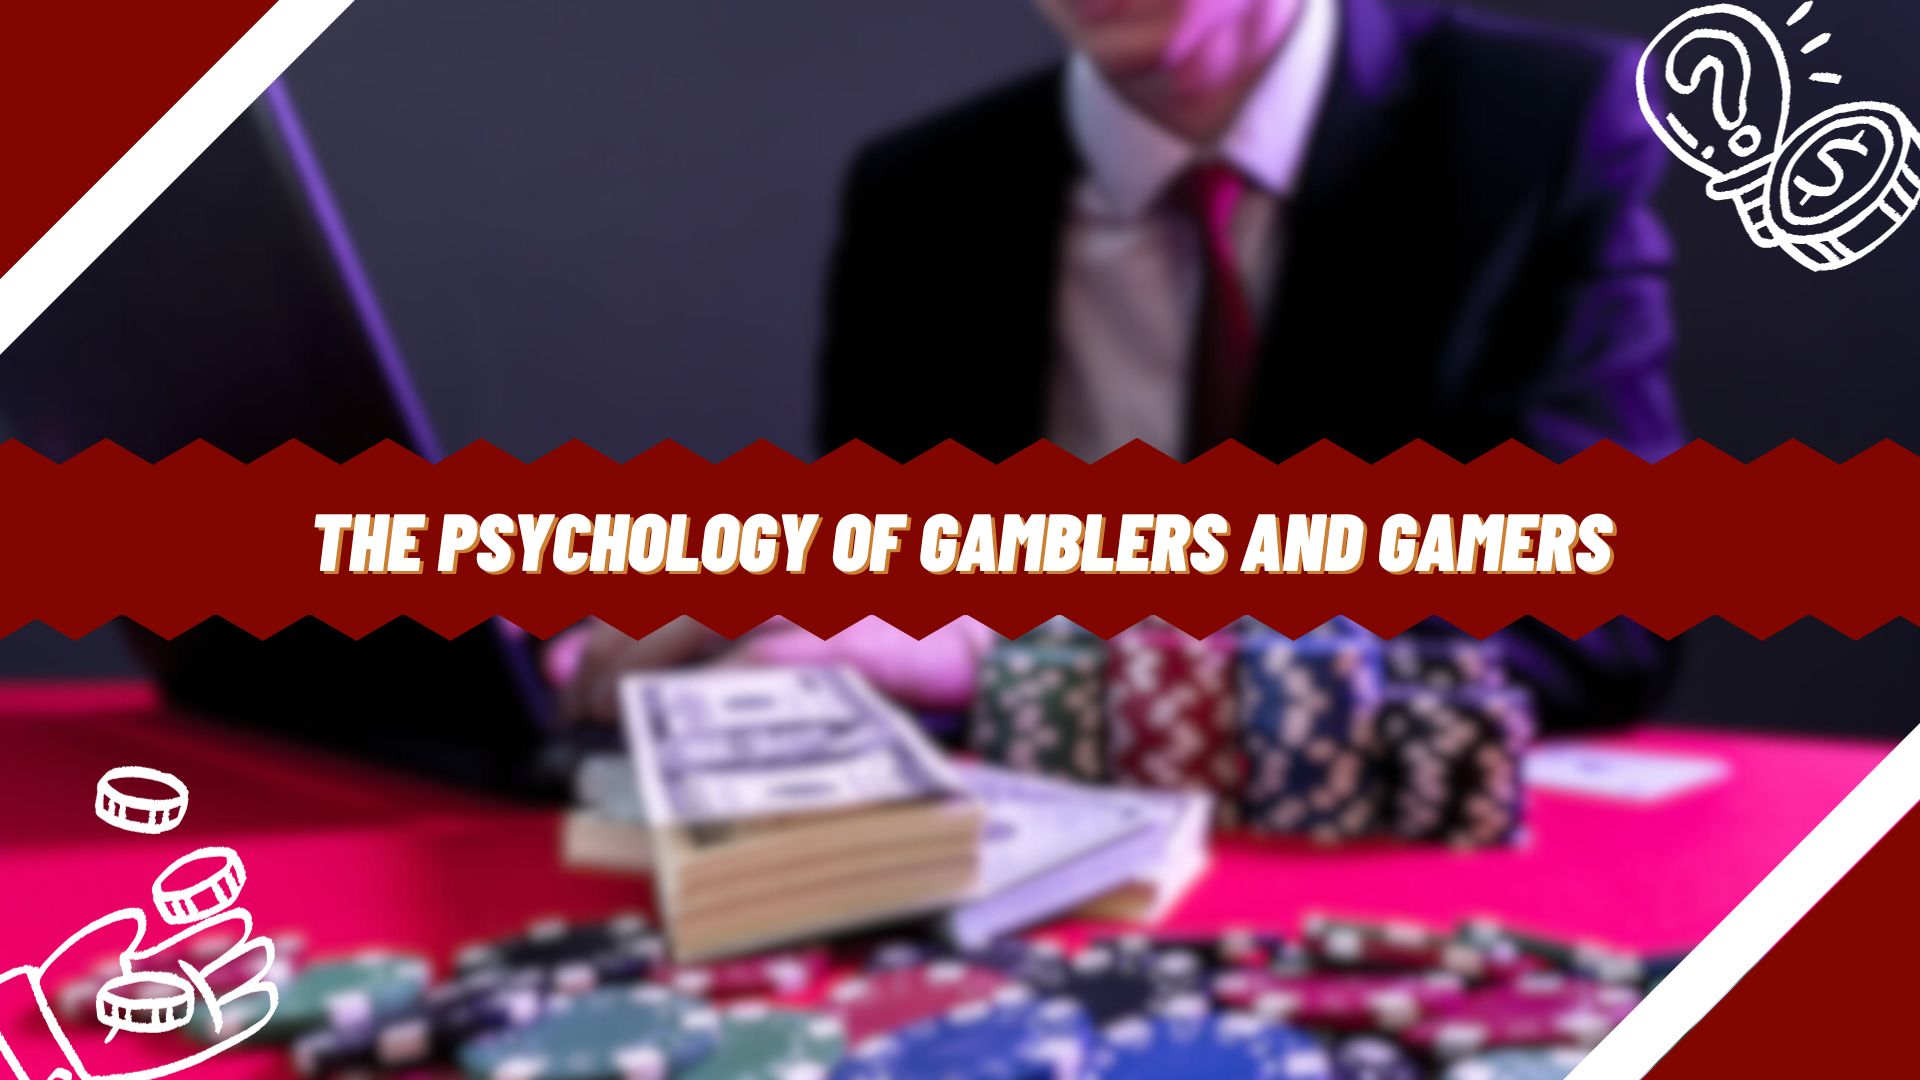 The Psychology of Gamblers and Gamers